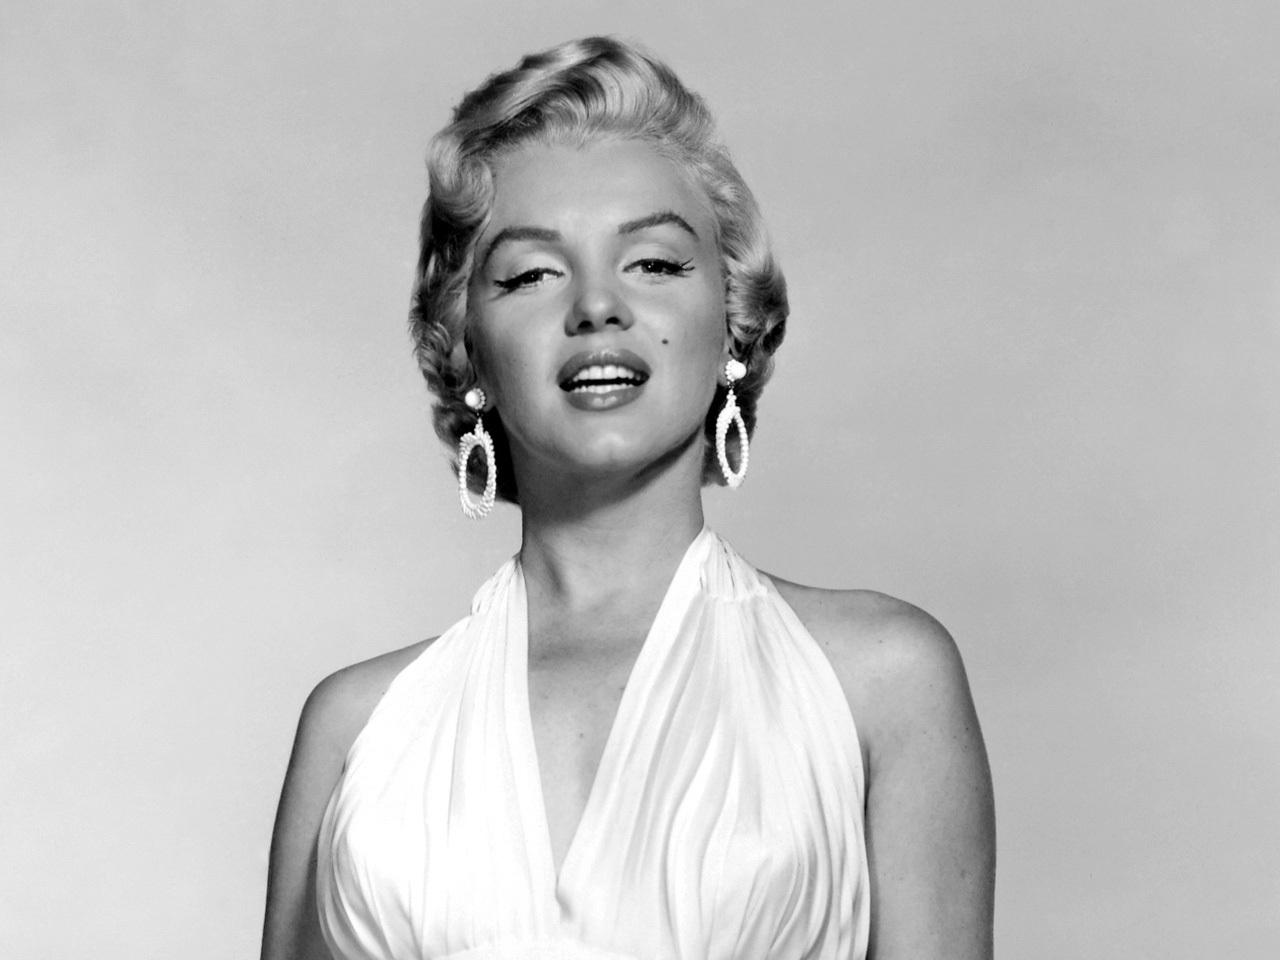 New data show how closely FBI monitored Marilyn Monroe - CBS News